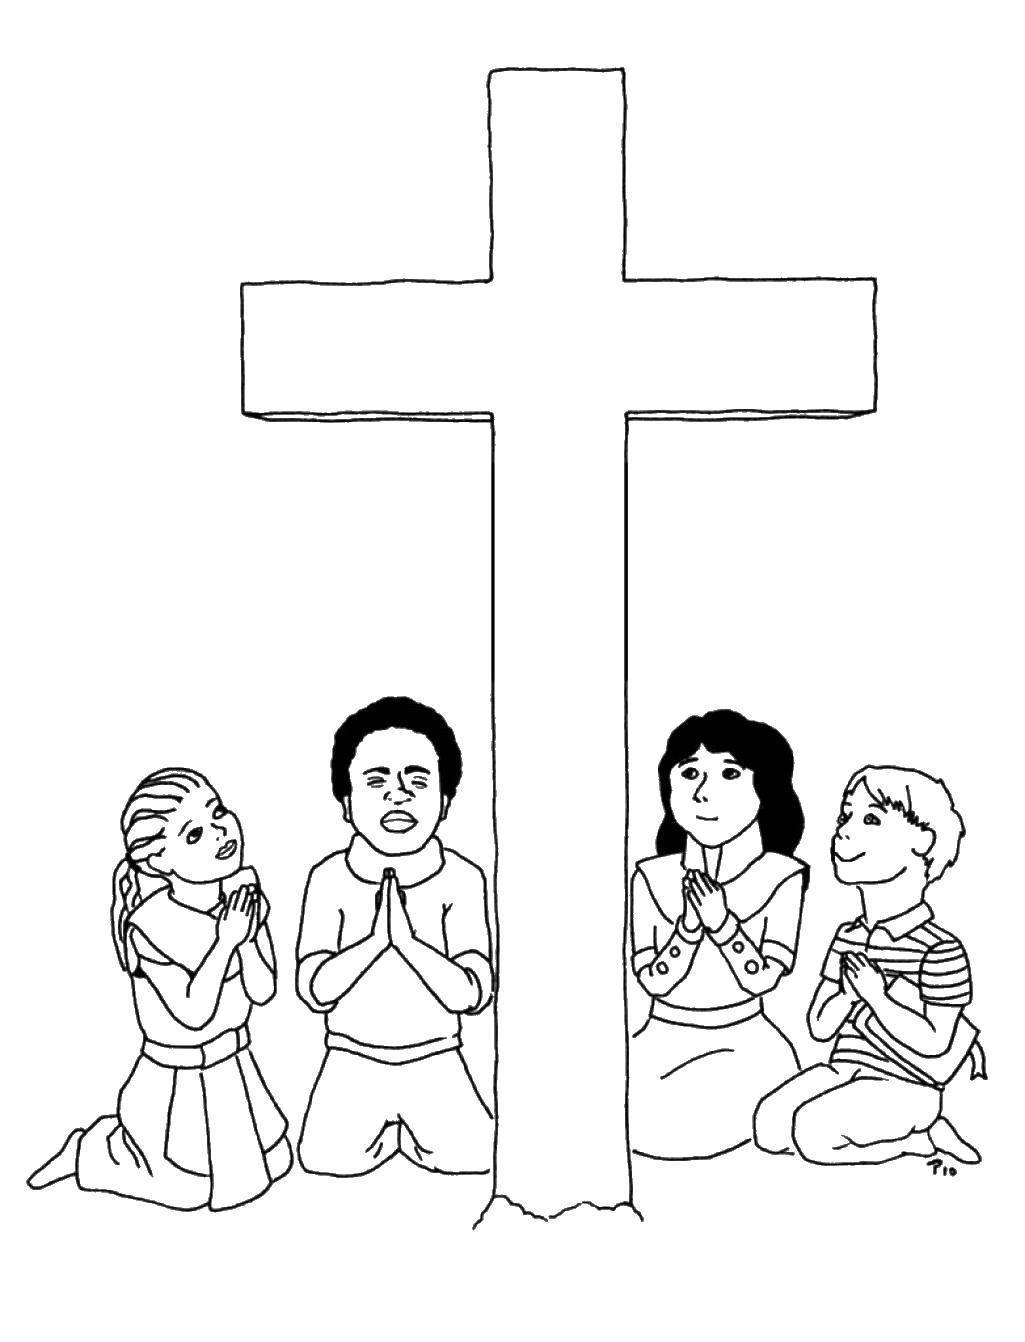 Coloring The children pray. Category coloring pages cross. Tags:  children, cross, religion.